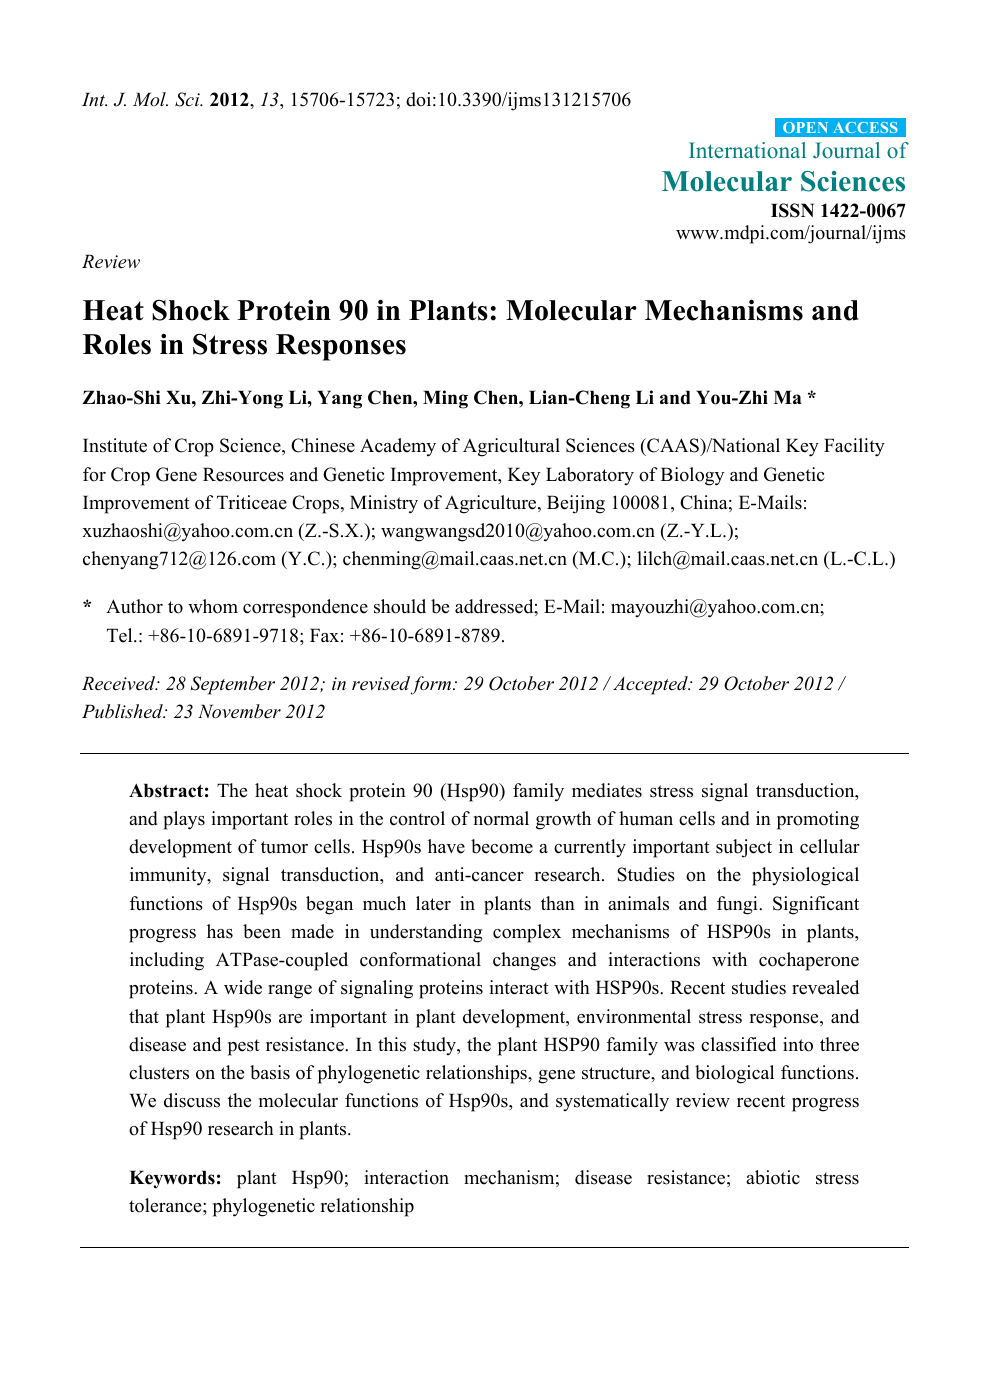 Heat Shock Protein 90 In Plants Molecular Mechanisms And Roles In Stress Responses Topic Of Research Paper In Biological Sciences Download Scholarly Article Pdf And Read For Free On Cyberleninka Open